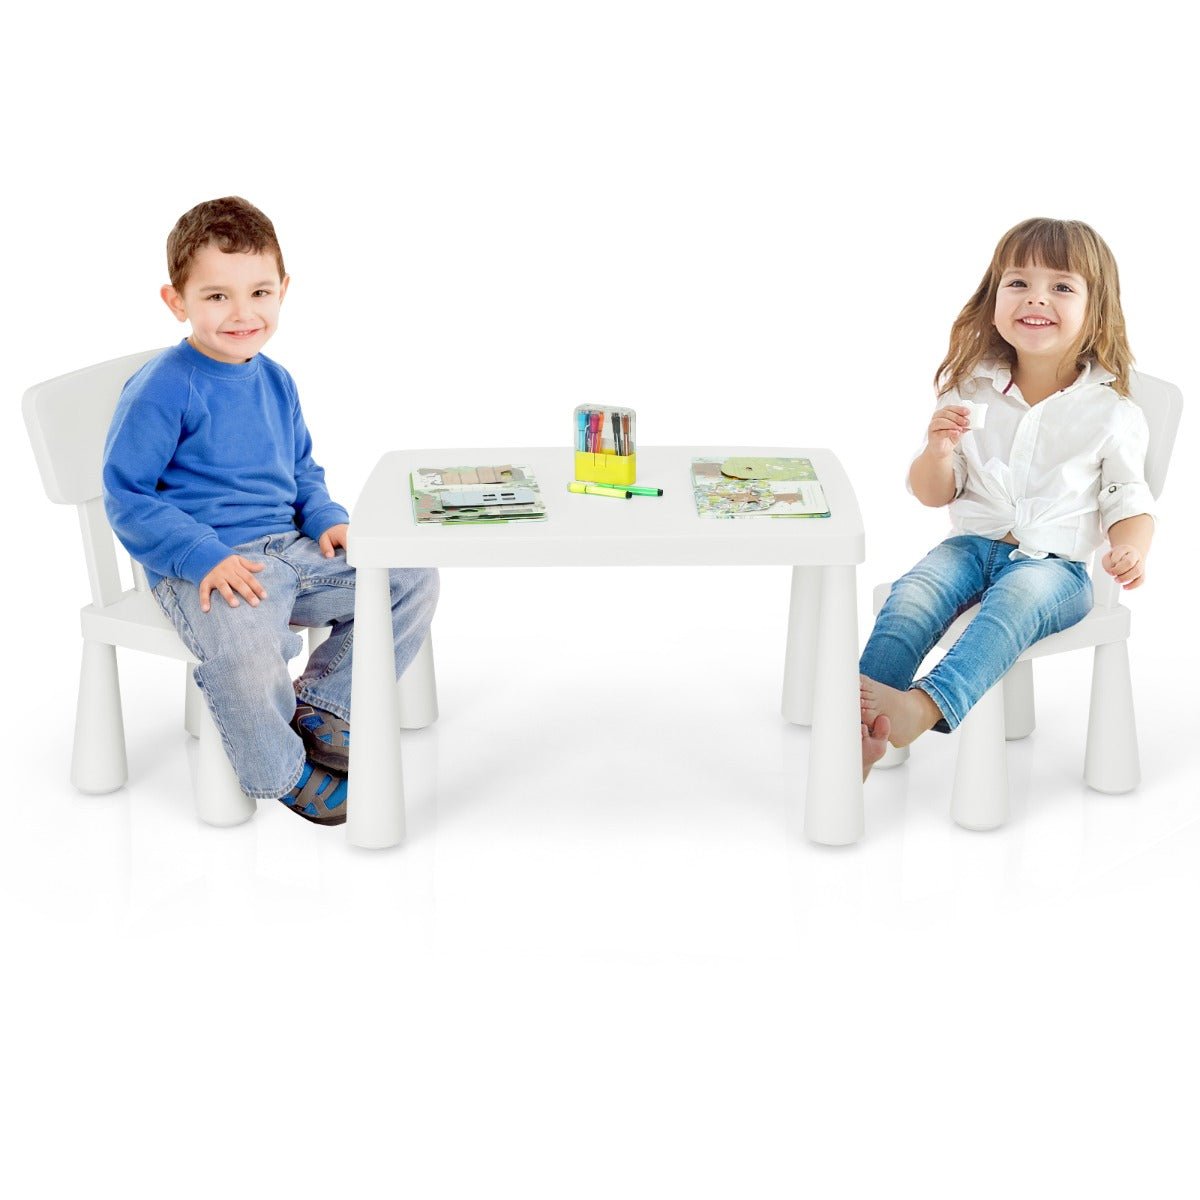 Children's Reading Corner Furniture - White Table and Chairs Ensemble